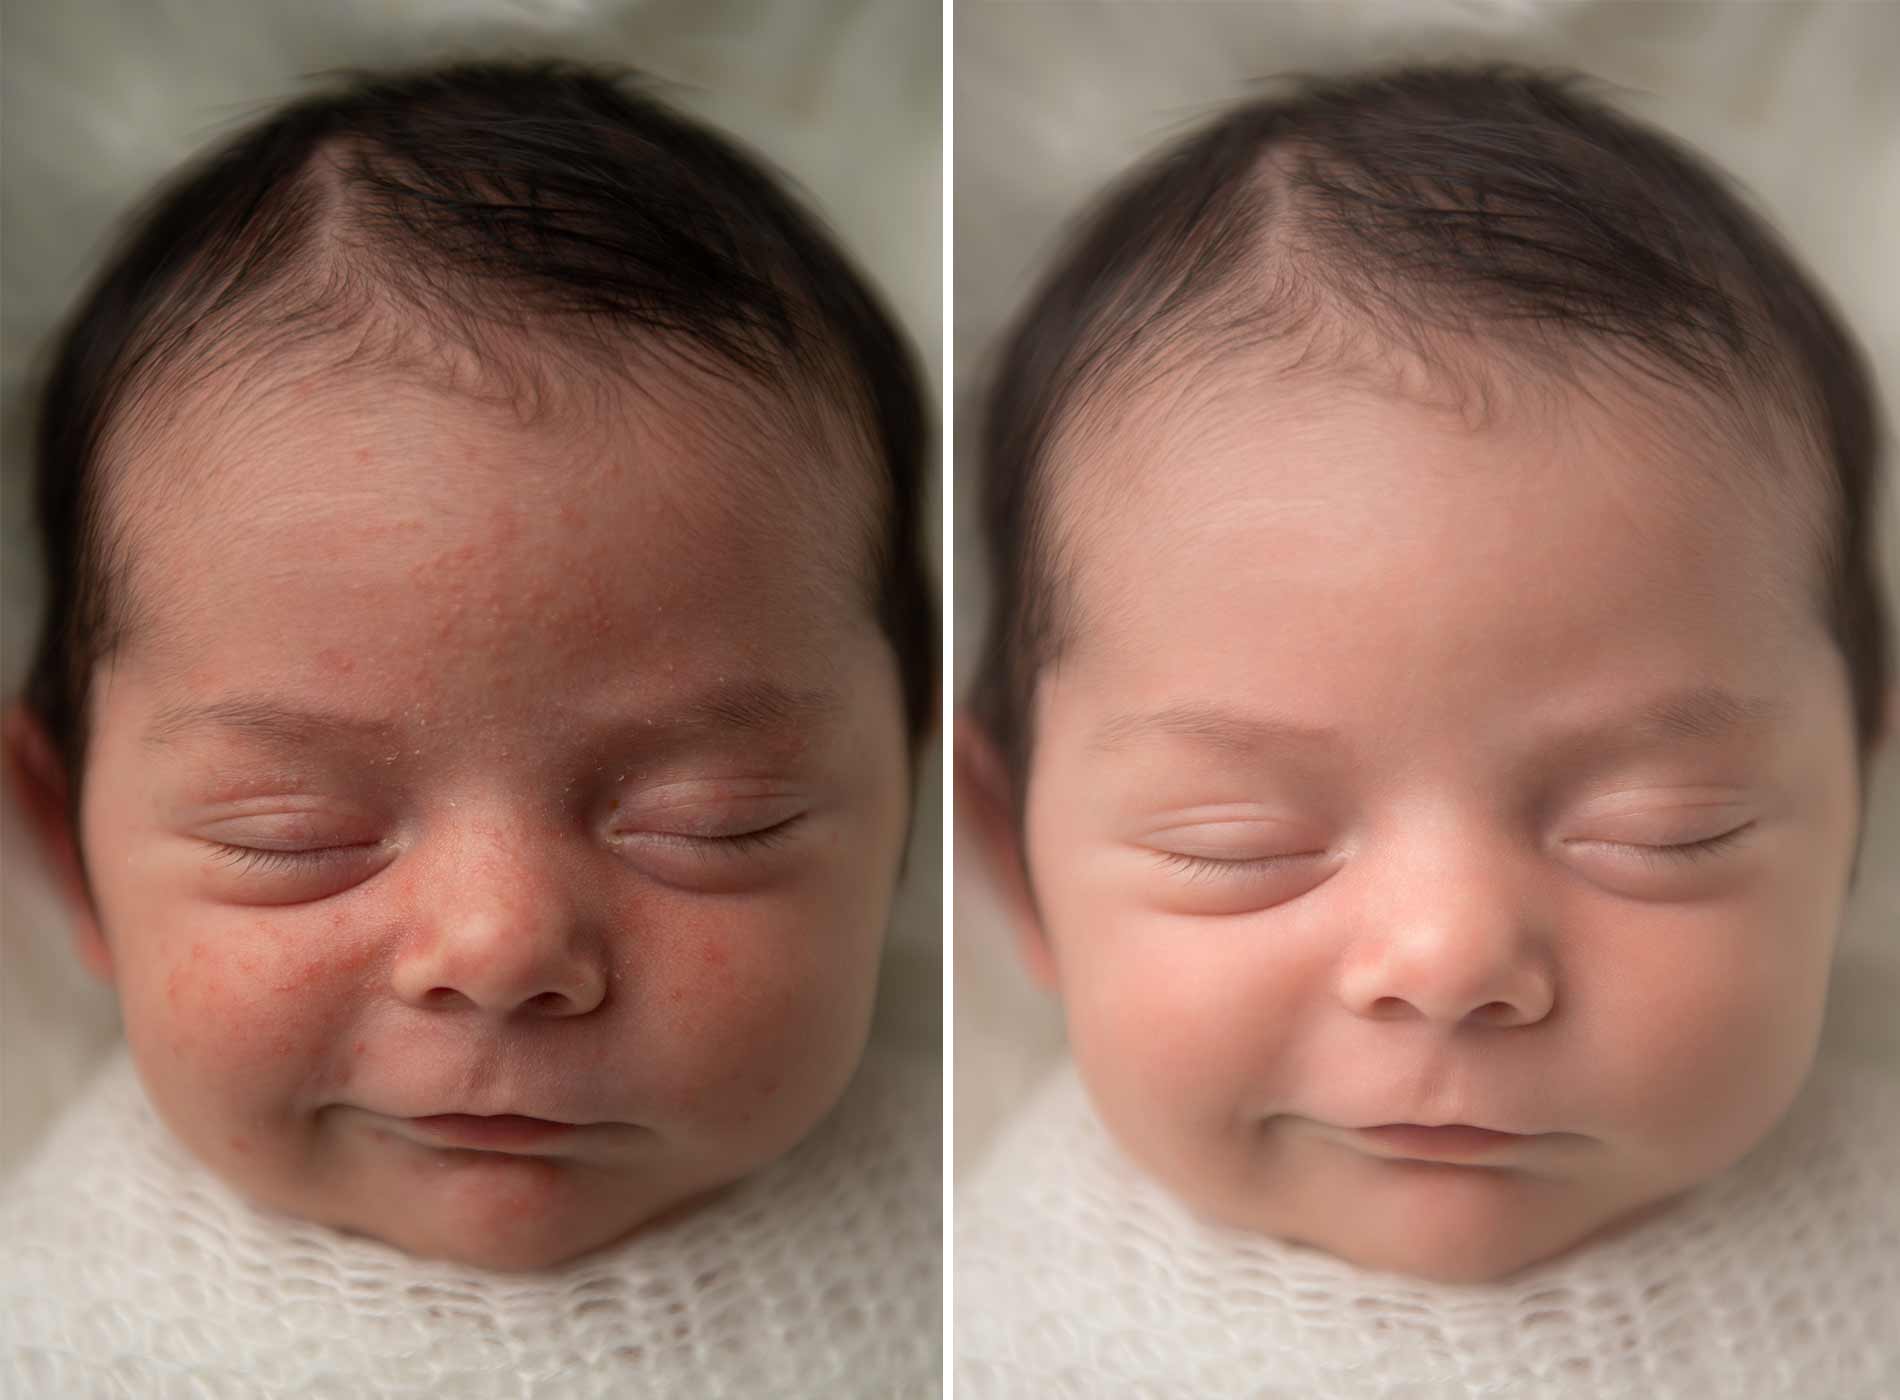 Skin editing on a newborn with baby acne